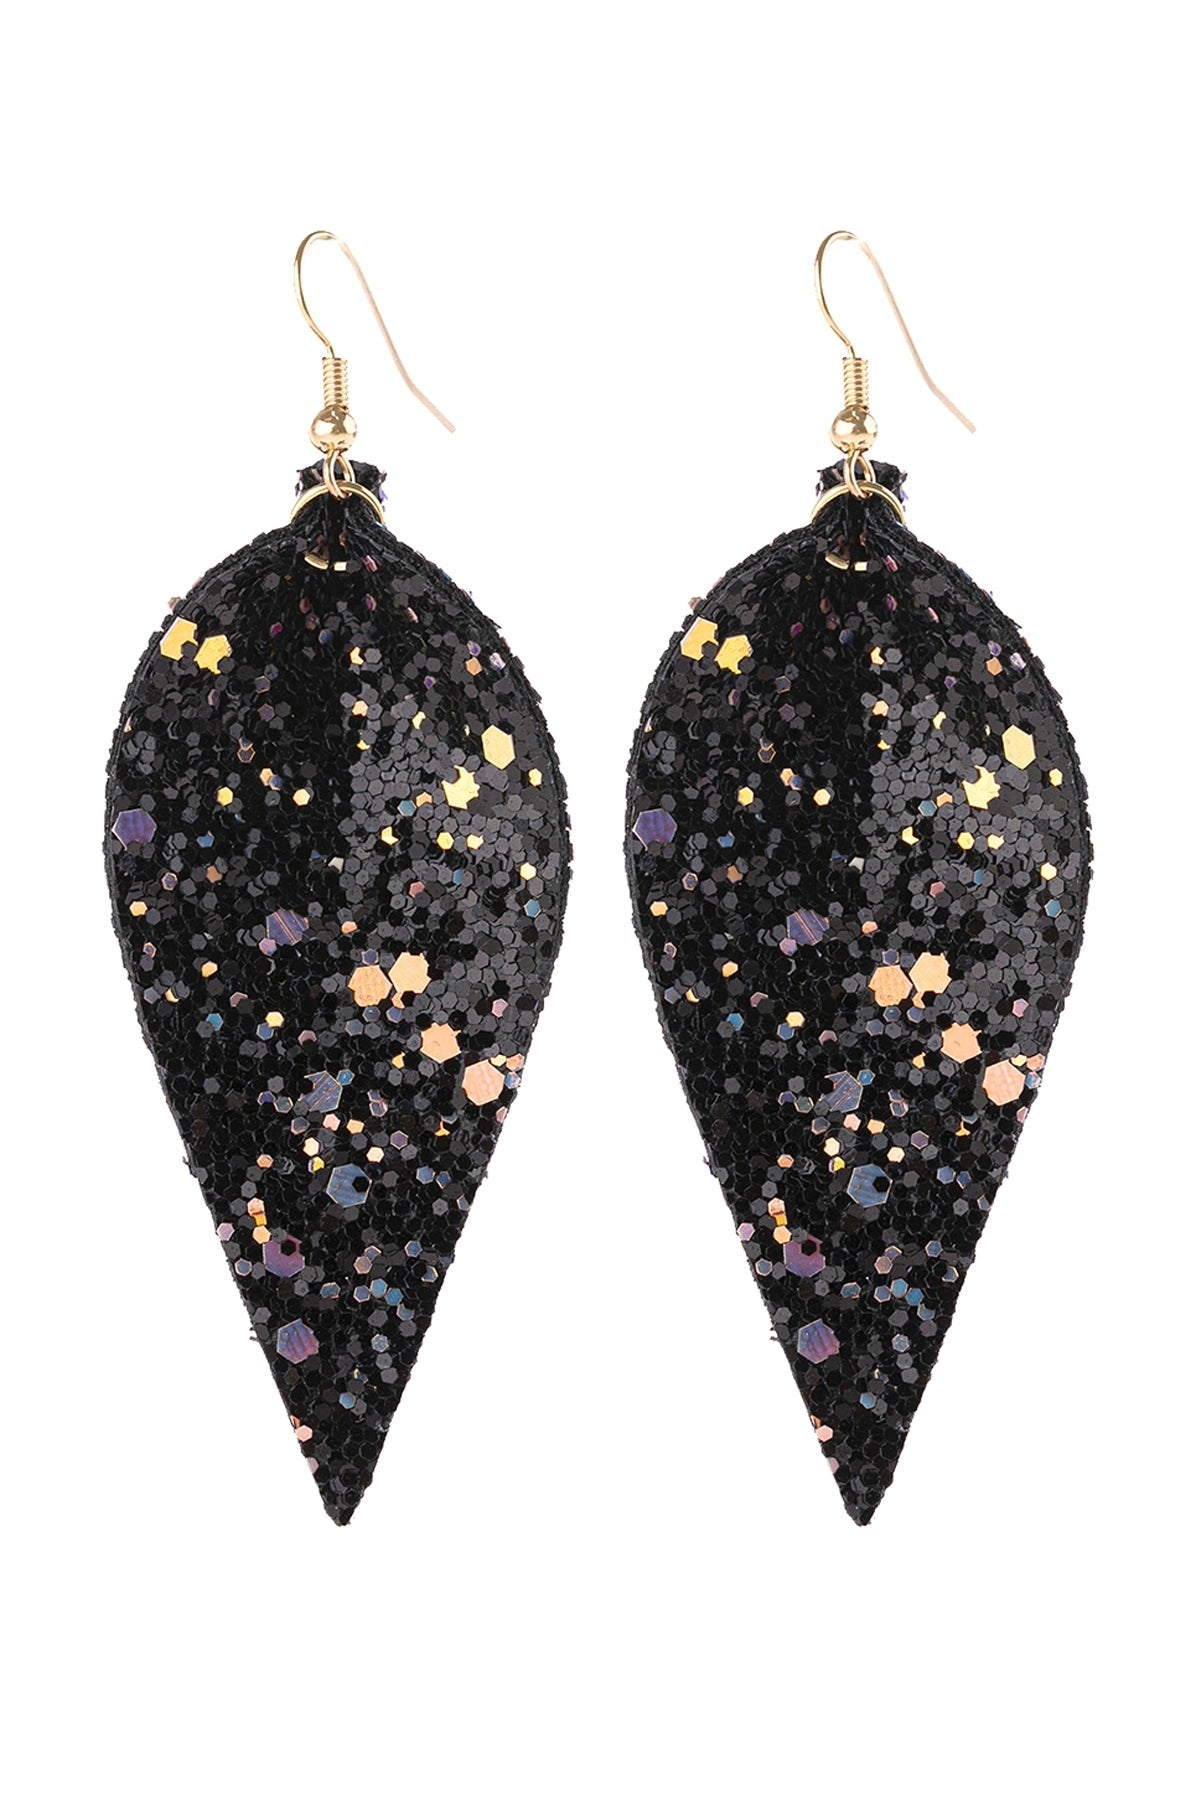 PINCHED SEQUIN LEATHER DROP EARRINGS/6PAIRS (NOW $1.25 ONLY!)